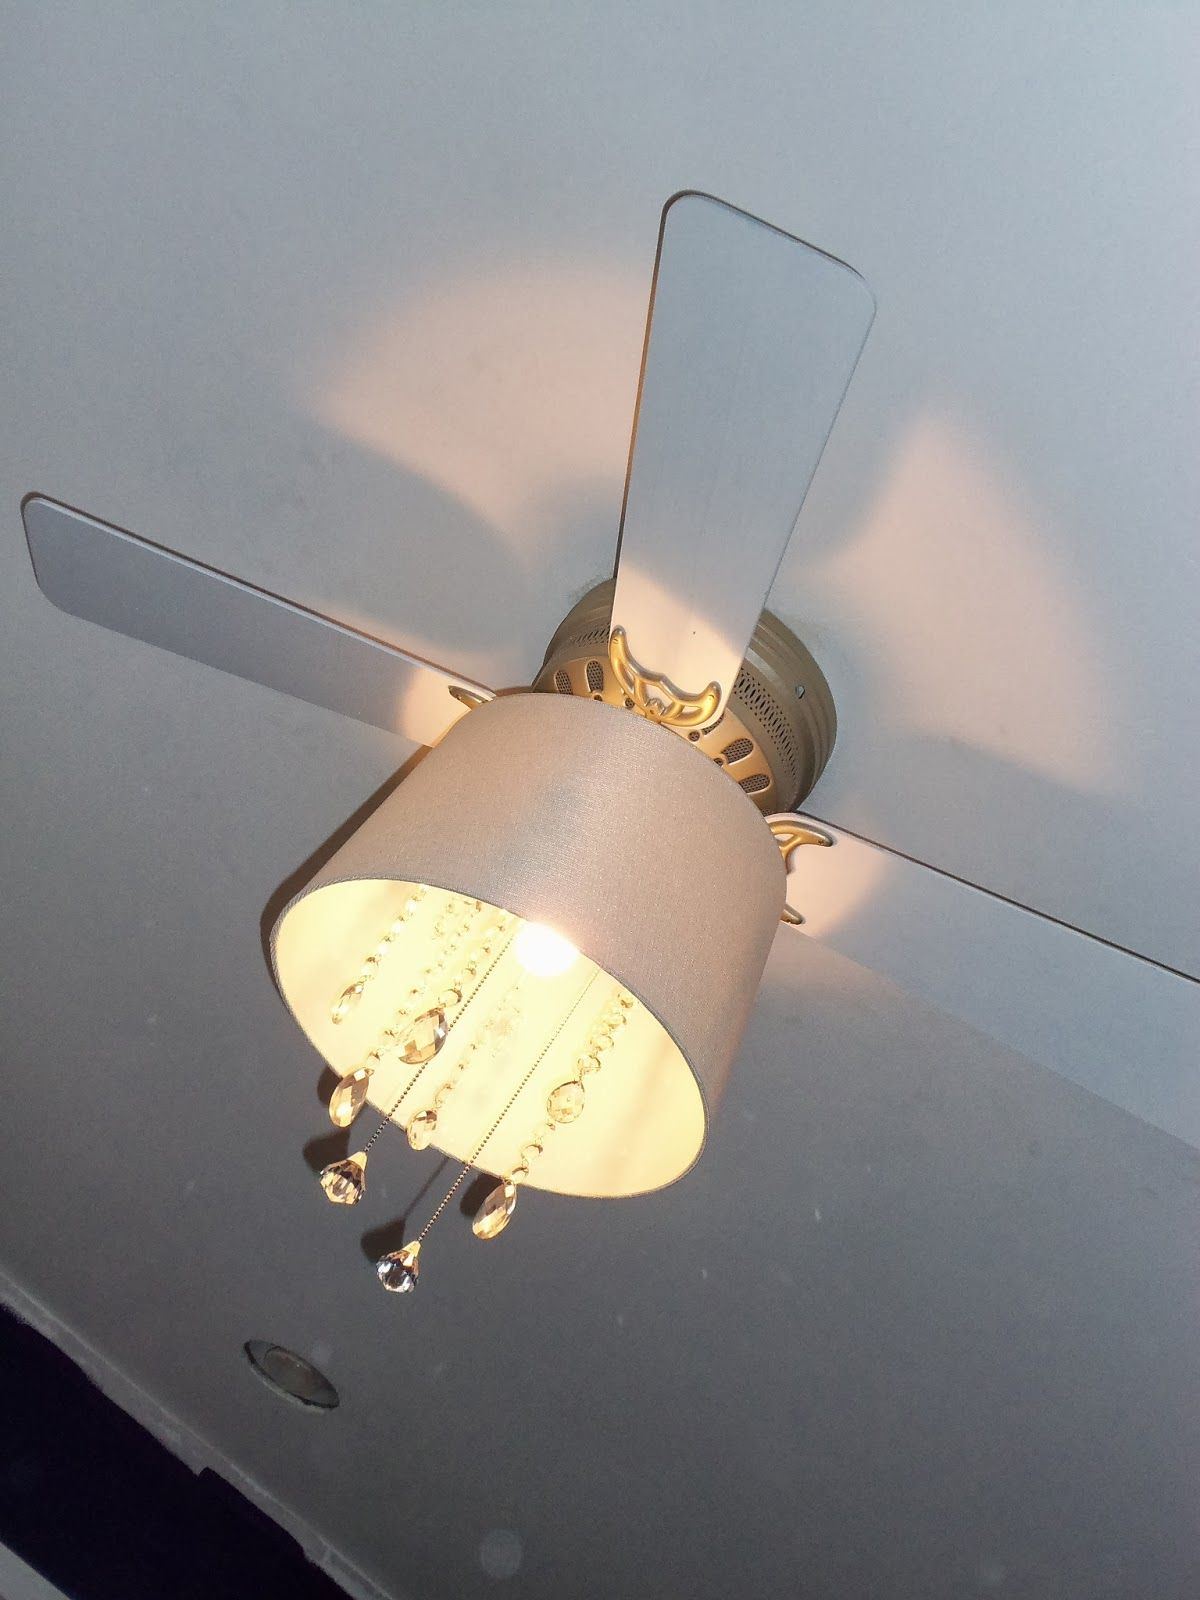 Diy Ceiling Fan Chandelier Good Idea But With A Smaller throughout proportions 1200 X 1600